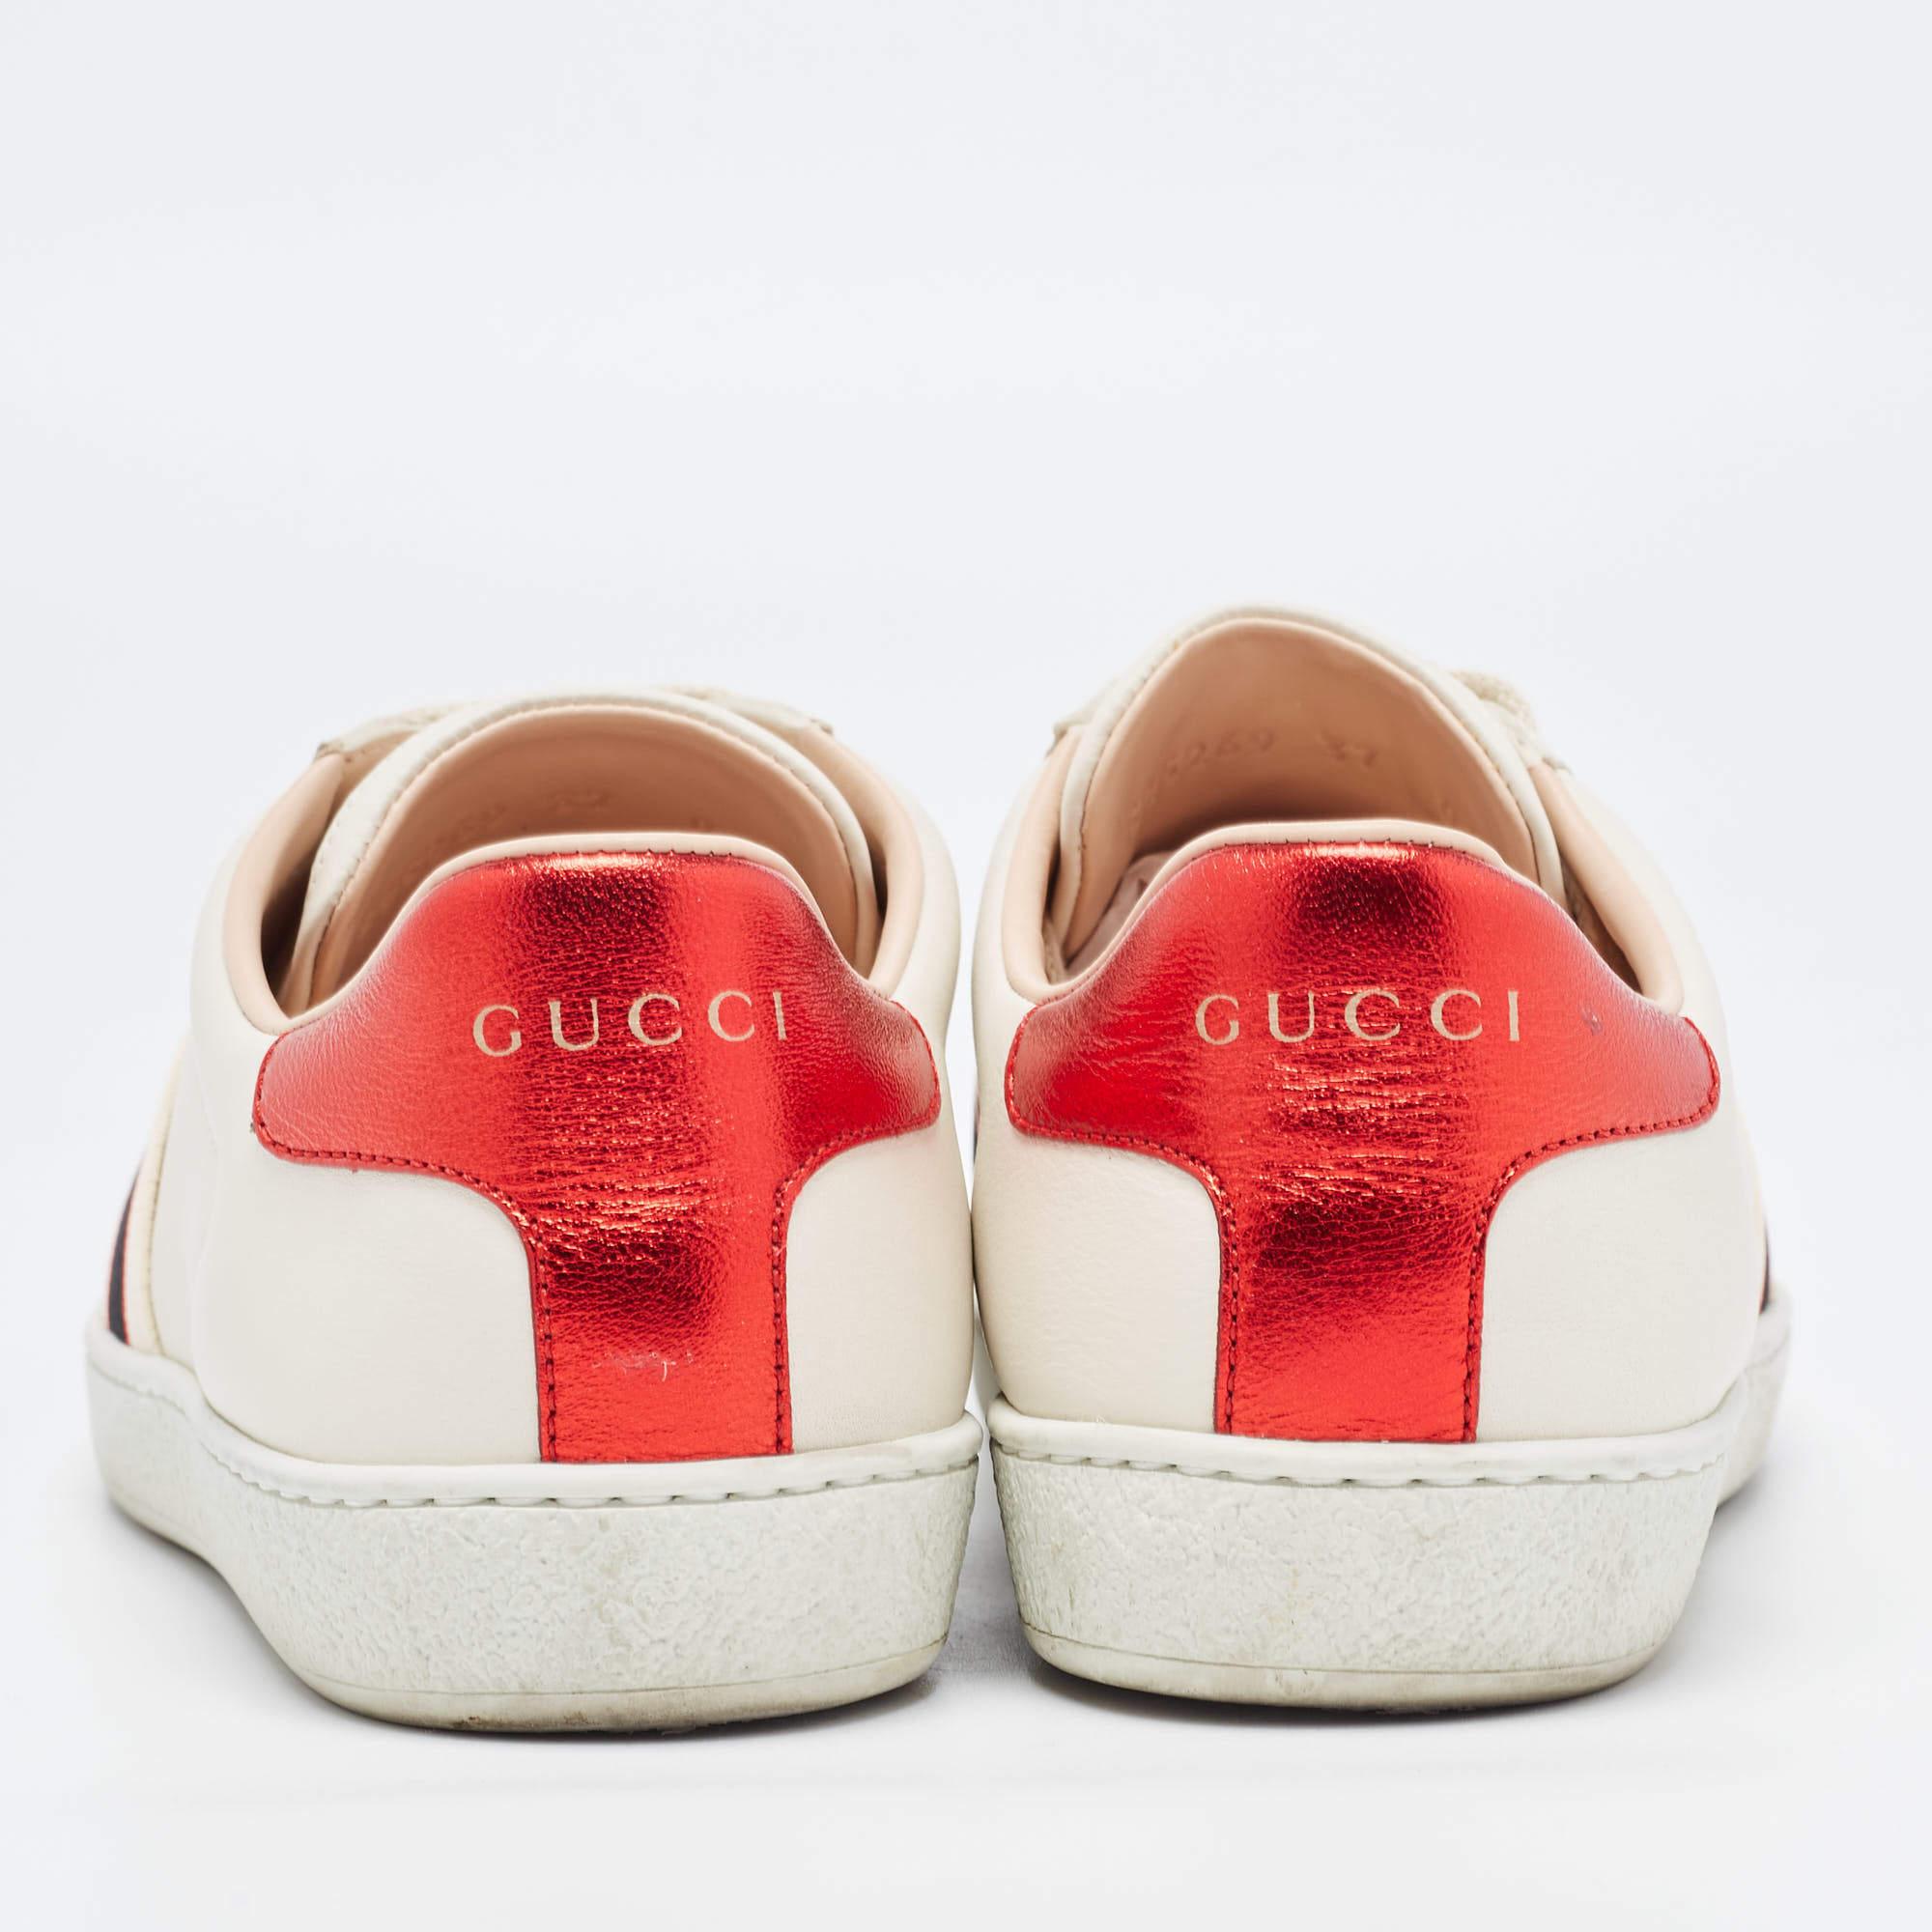 Gucci Cream/Red Leather Ace Gucci Band Low Top Sneakers Size 37 3